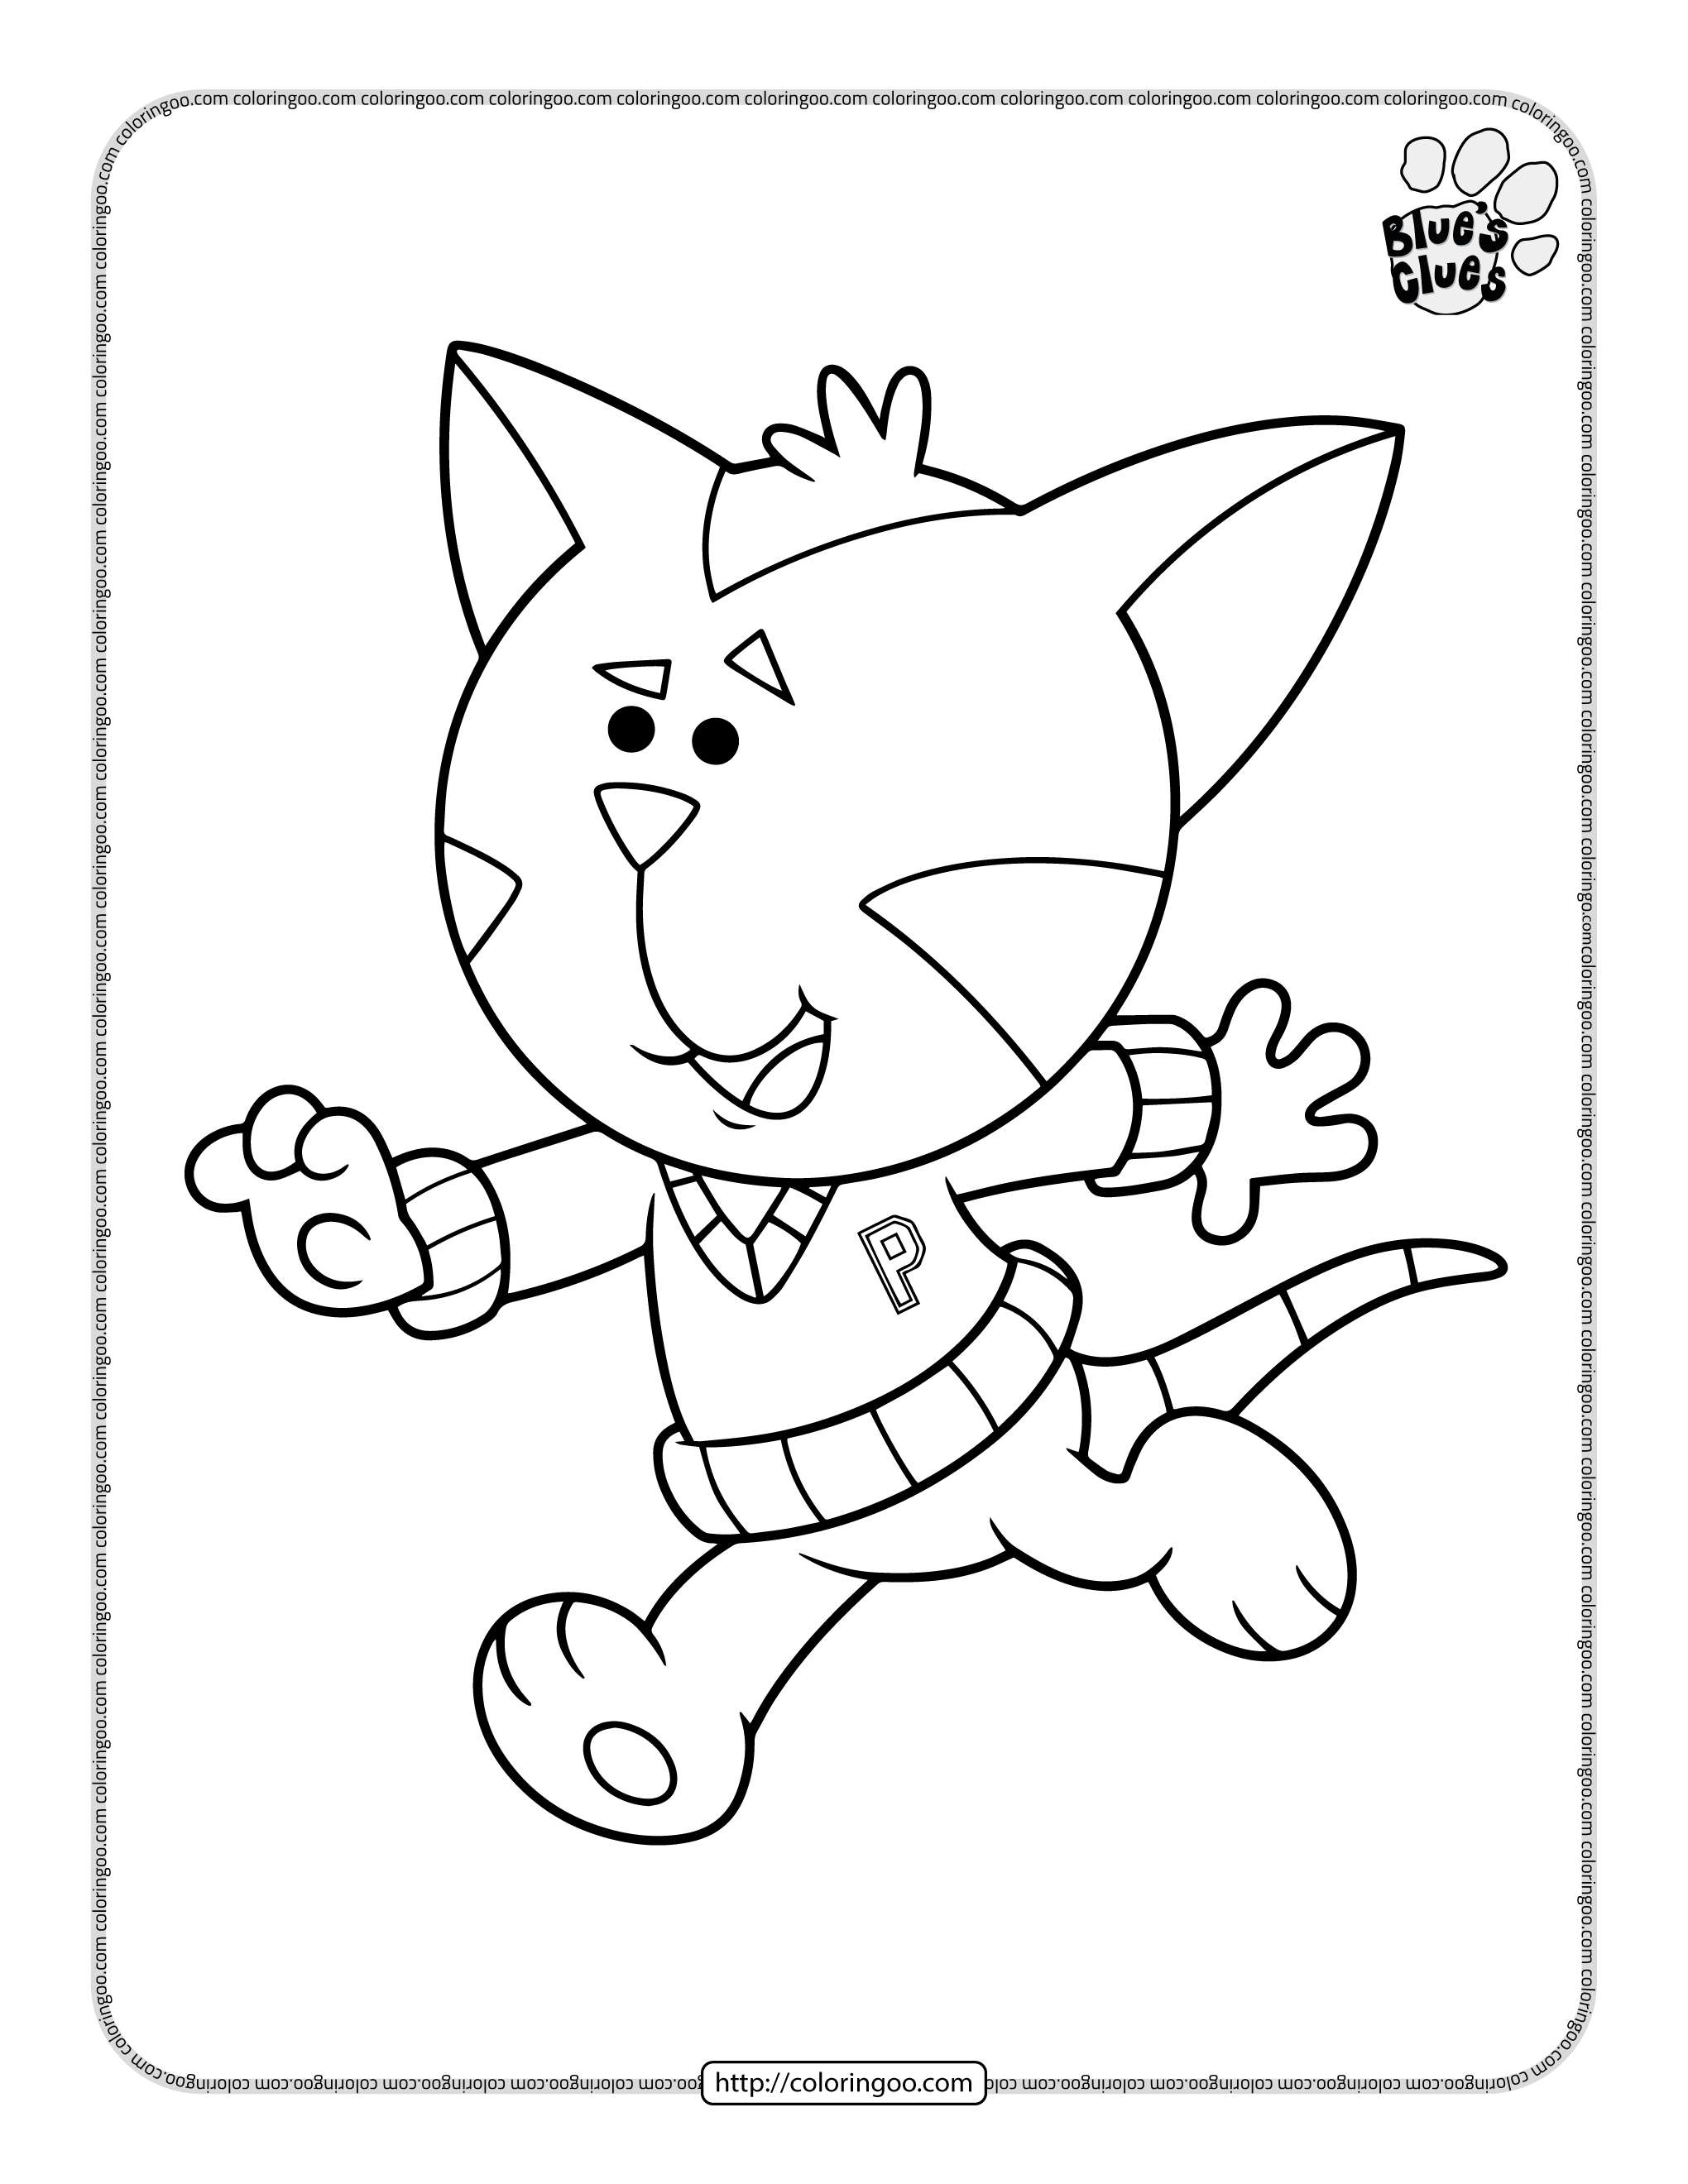 periwinkle from blues clues coloring sheet